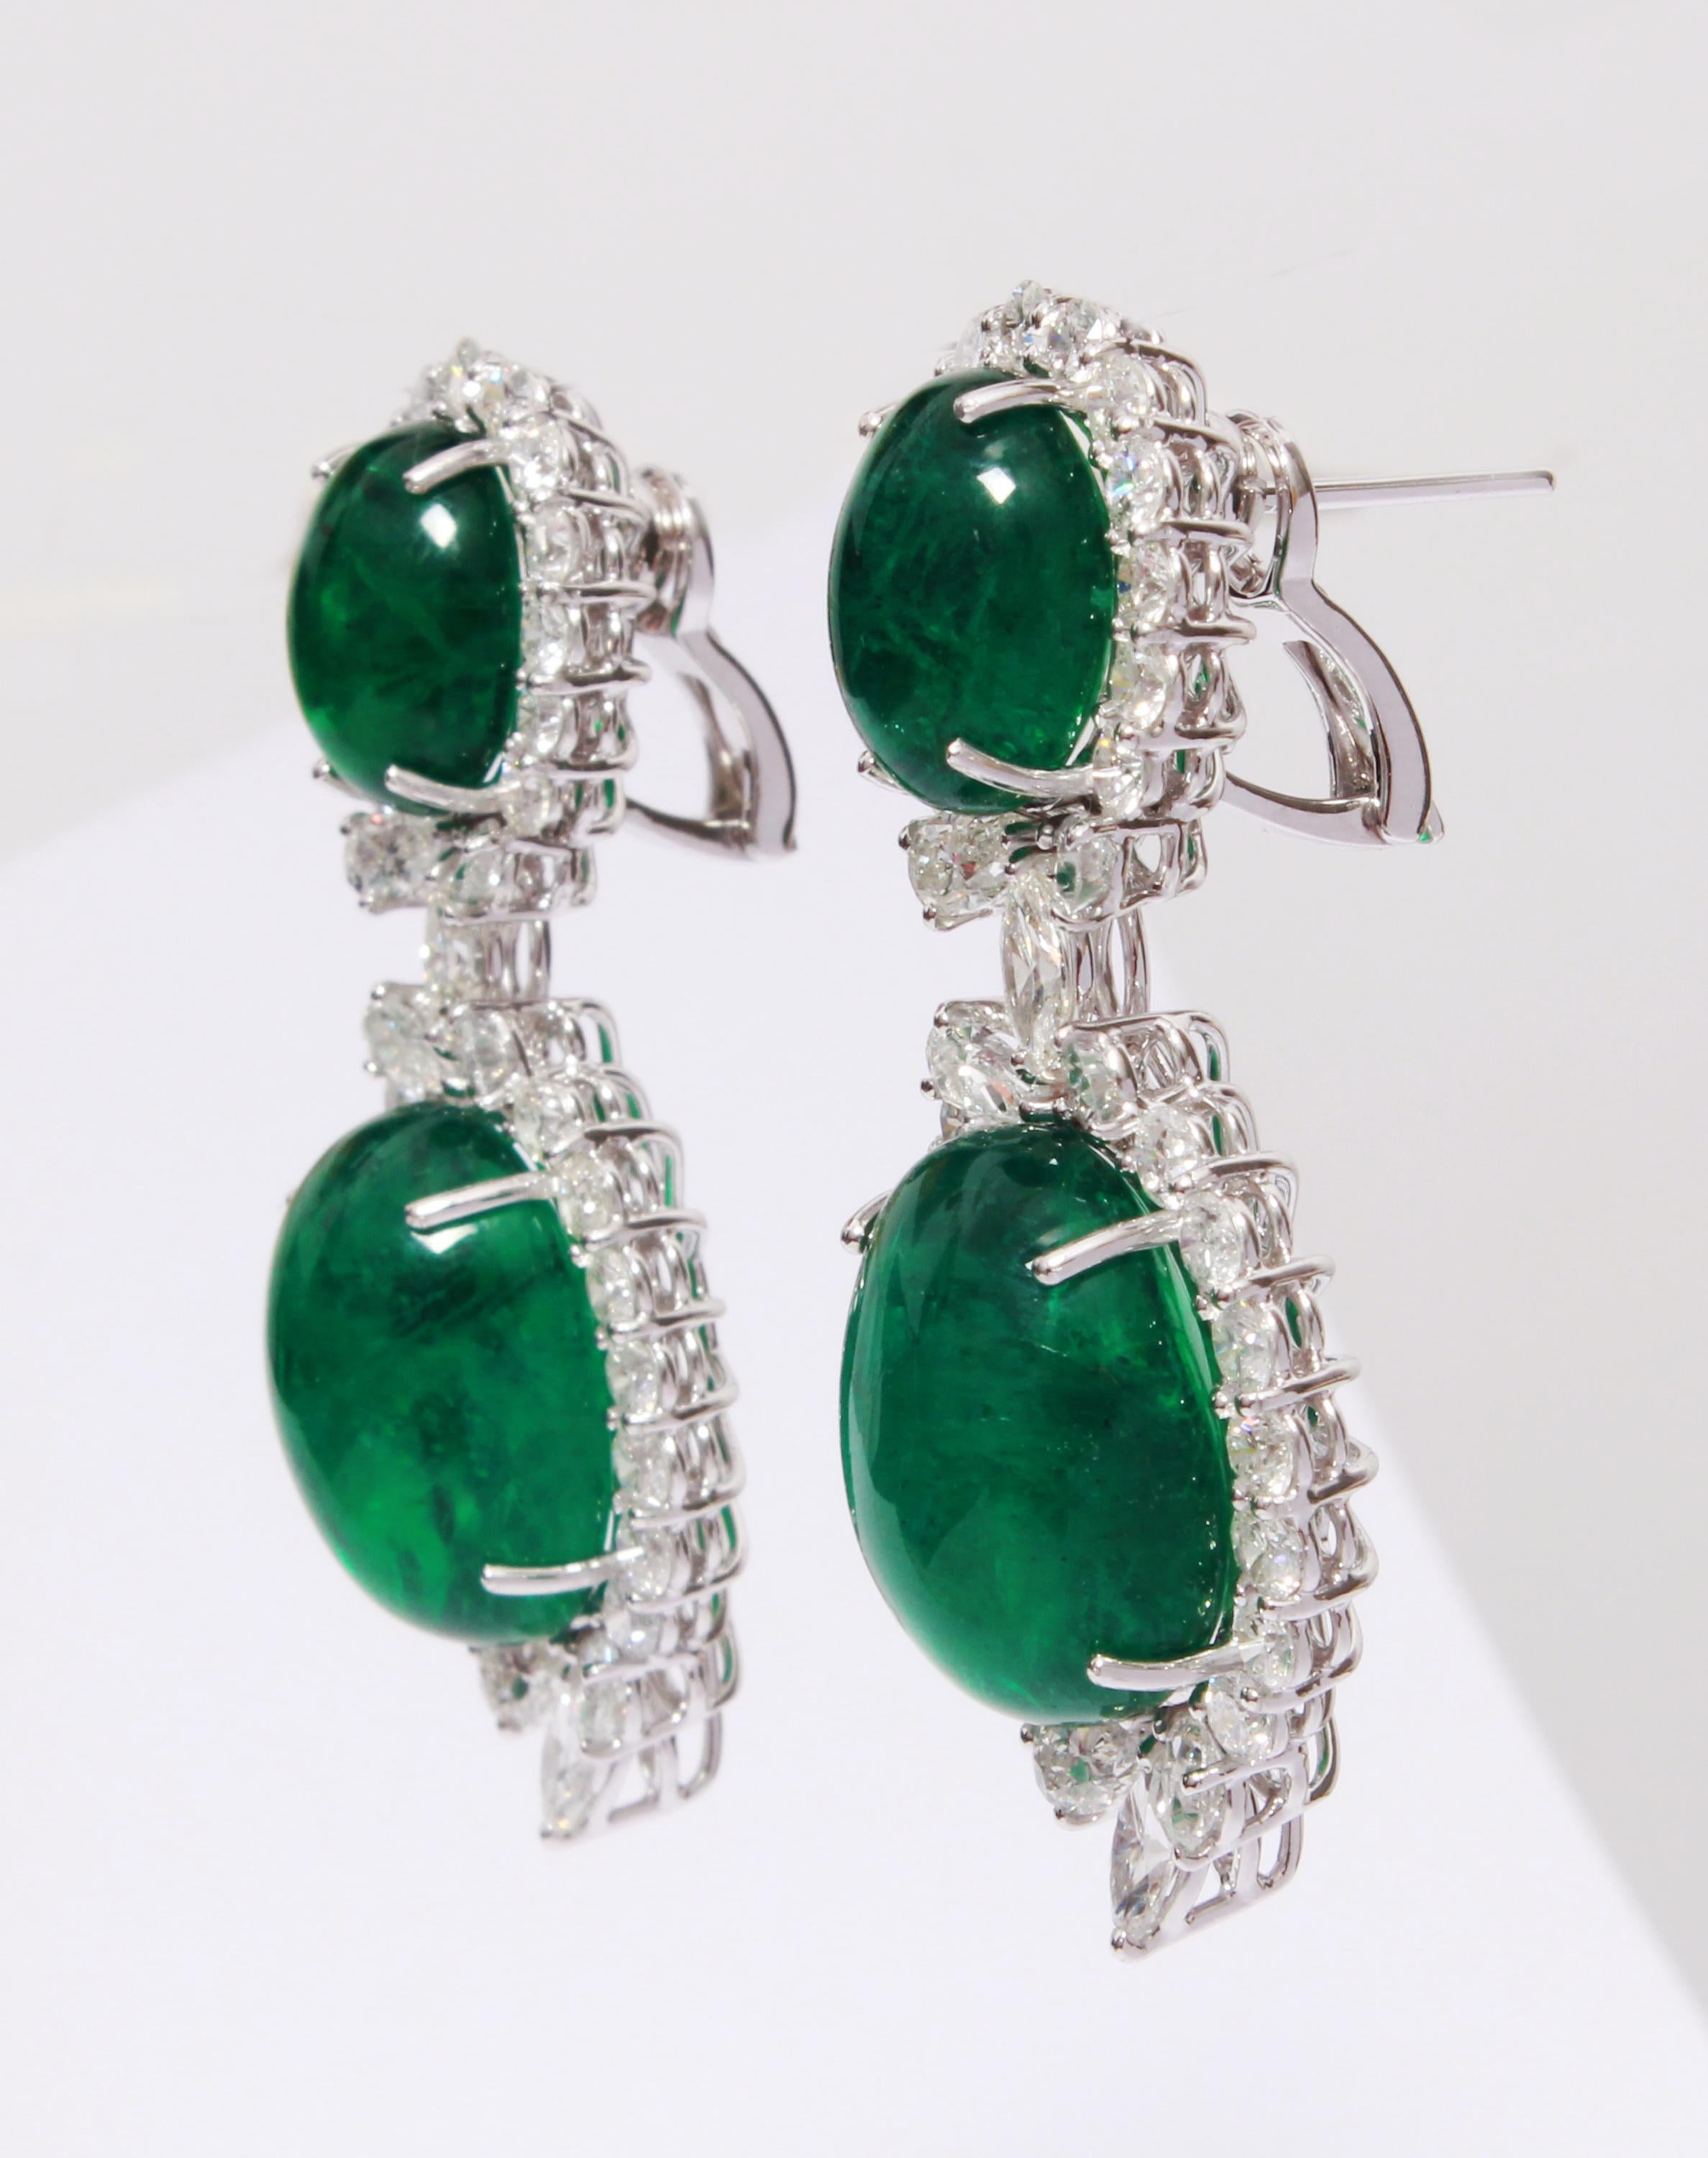 This Earrings has 4 pieces of Zambian emeralds which weighs 49.80 carats, which is surrounded by 54 Round Cut White Diamonds that weigh 4.70 carats, 12 Pears Cut White Diamonds that weigh 2.65 carats and 4 Marquise Cut White Diamonds that weigh 1.03